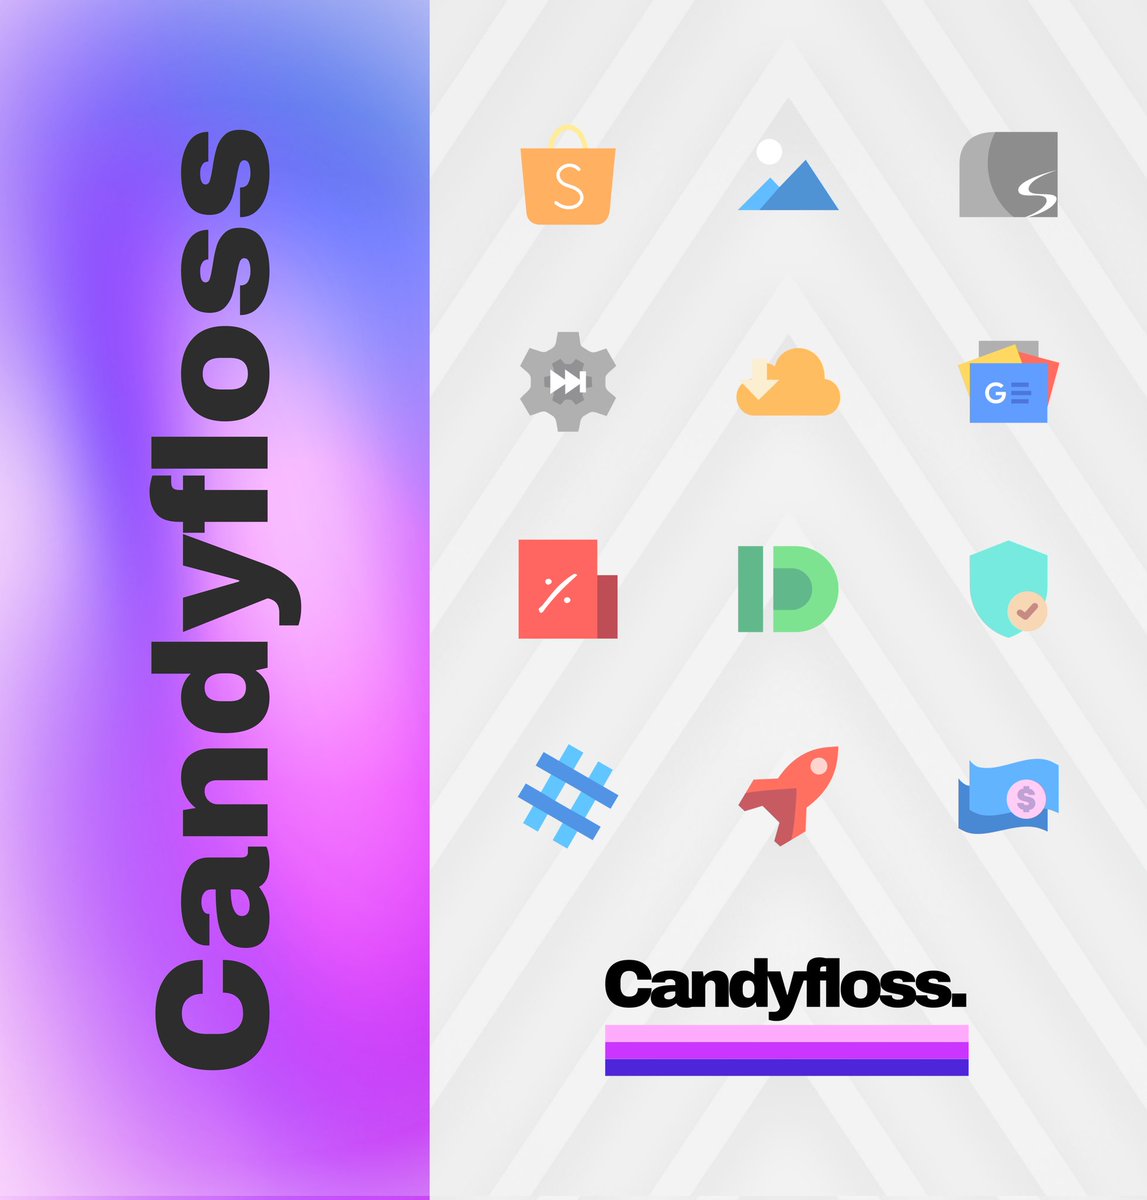 1st update of the week for Candyfloss is live on the store! 

🔸 Added 30 new icons! 
🔸 740 total icons now! 

Get it here at EARLY ACCESS PRICES: bit.ly/CandyflossIcons 

RTs and ❤️s ll be highly appreciated! 
 
Cheers guys!